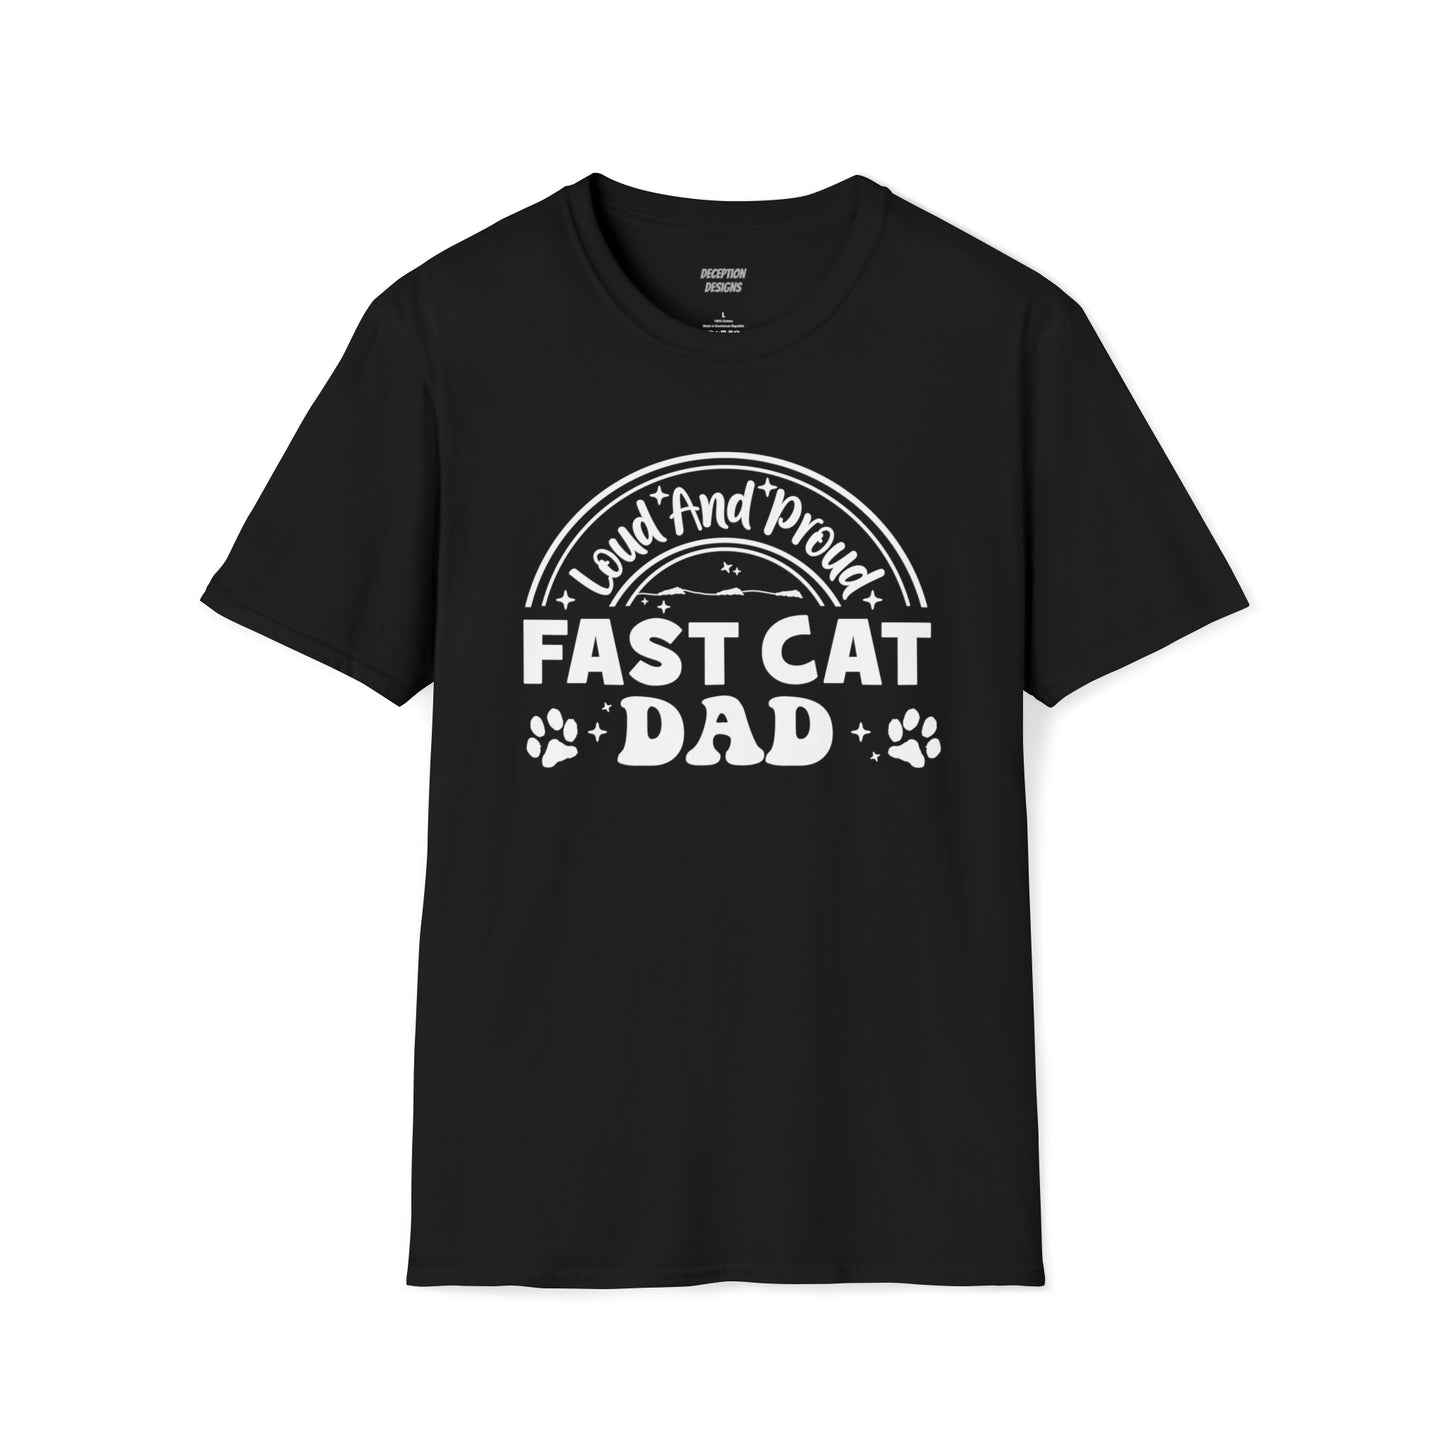 LOUD PROUD FAST CAT DAD -  Unisex Softstyle T-Shirt